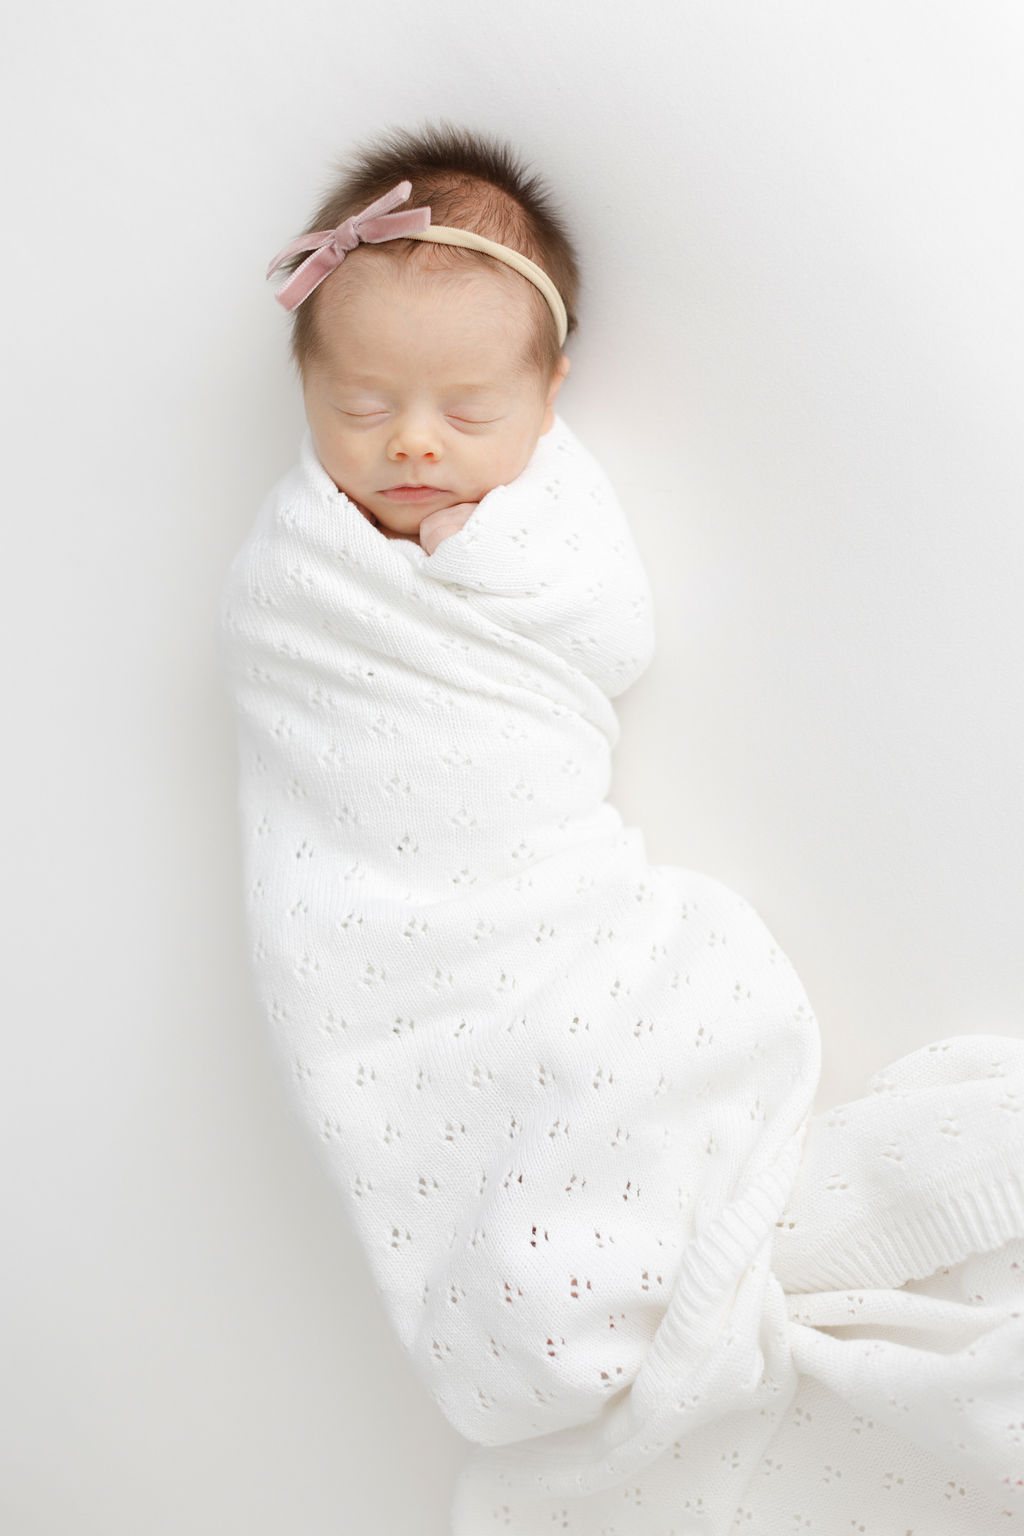 A newborn baby sleeps in a white blanket swaddle while wearing a pink bow headband